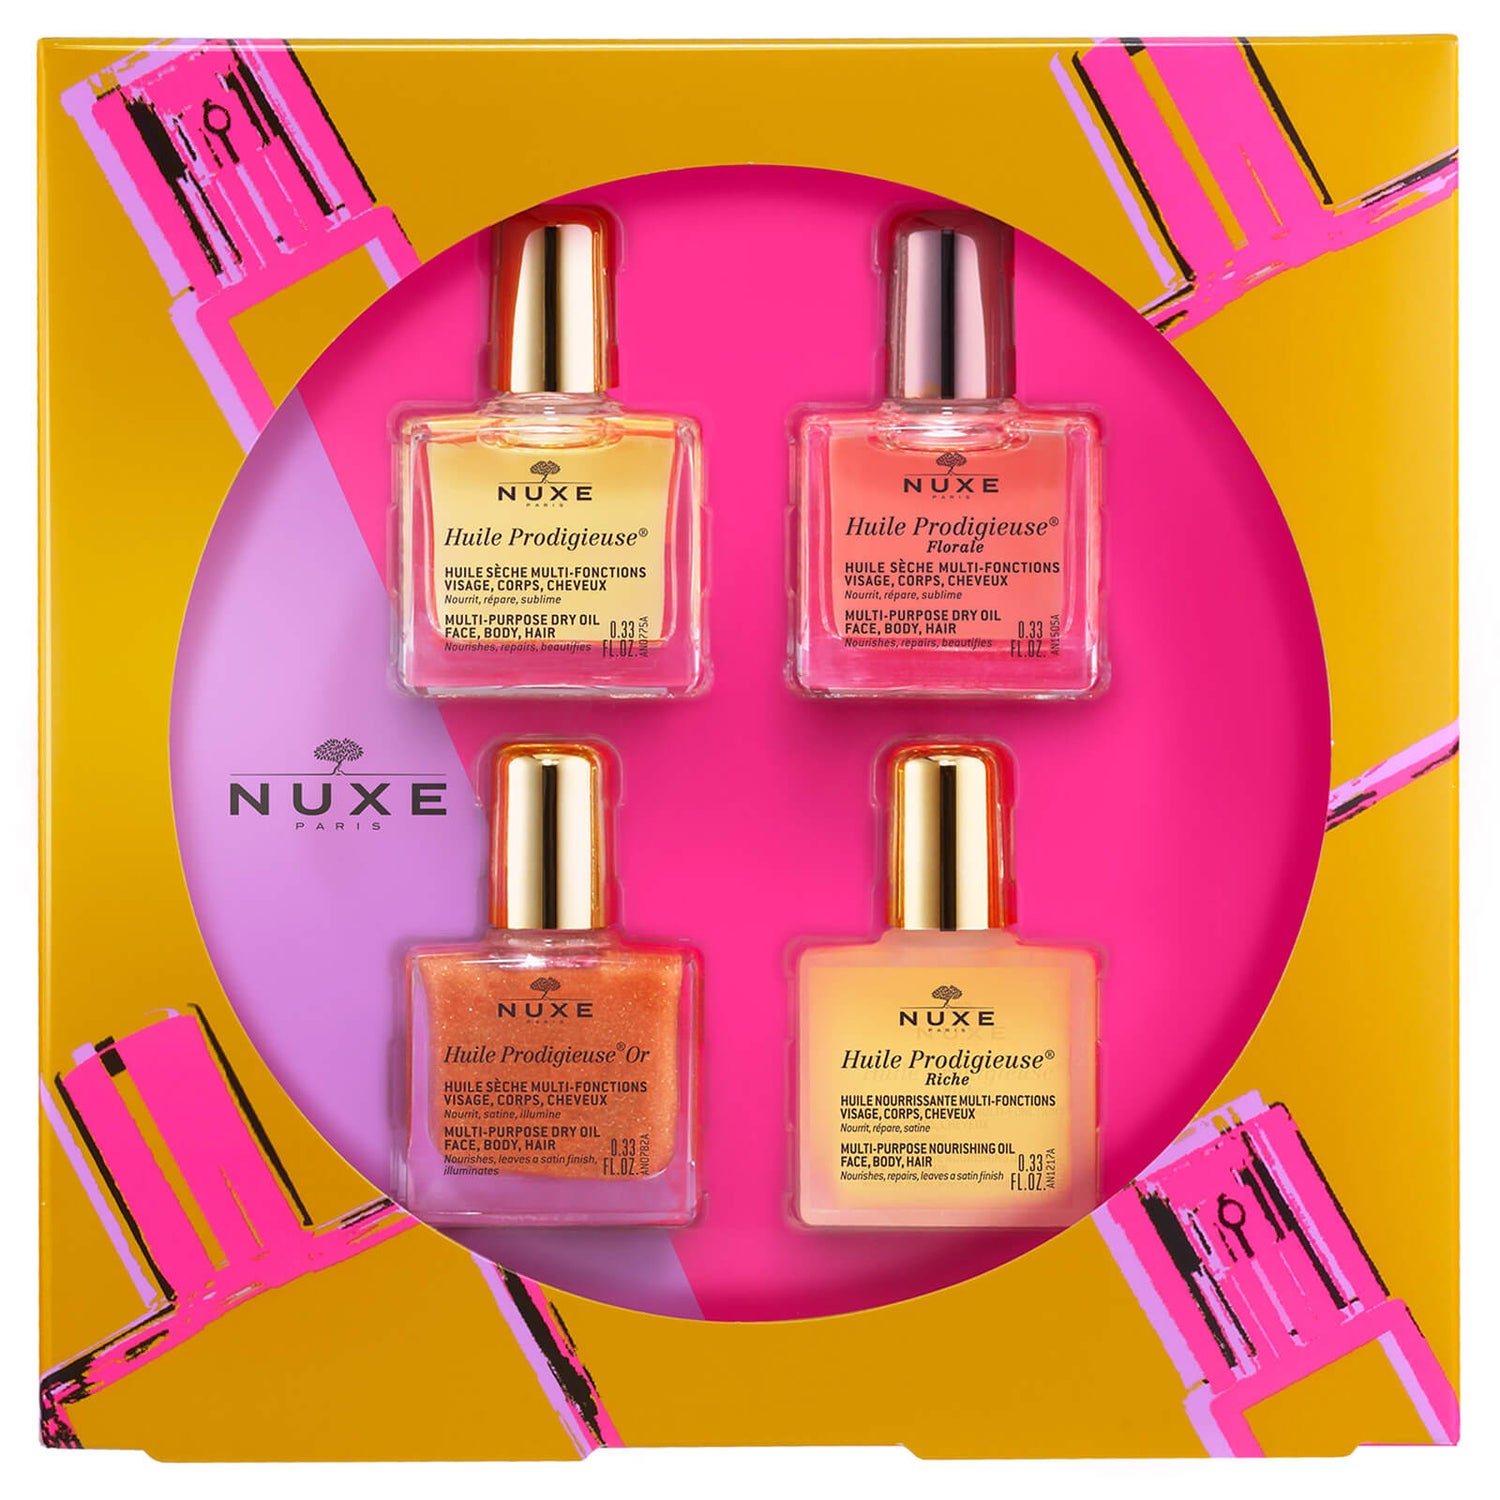 NUXE Huile Prodigieuse Iconic Collection Gift Set (Worth £13.00)